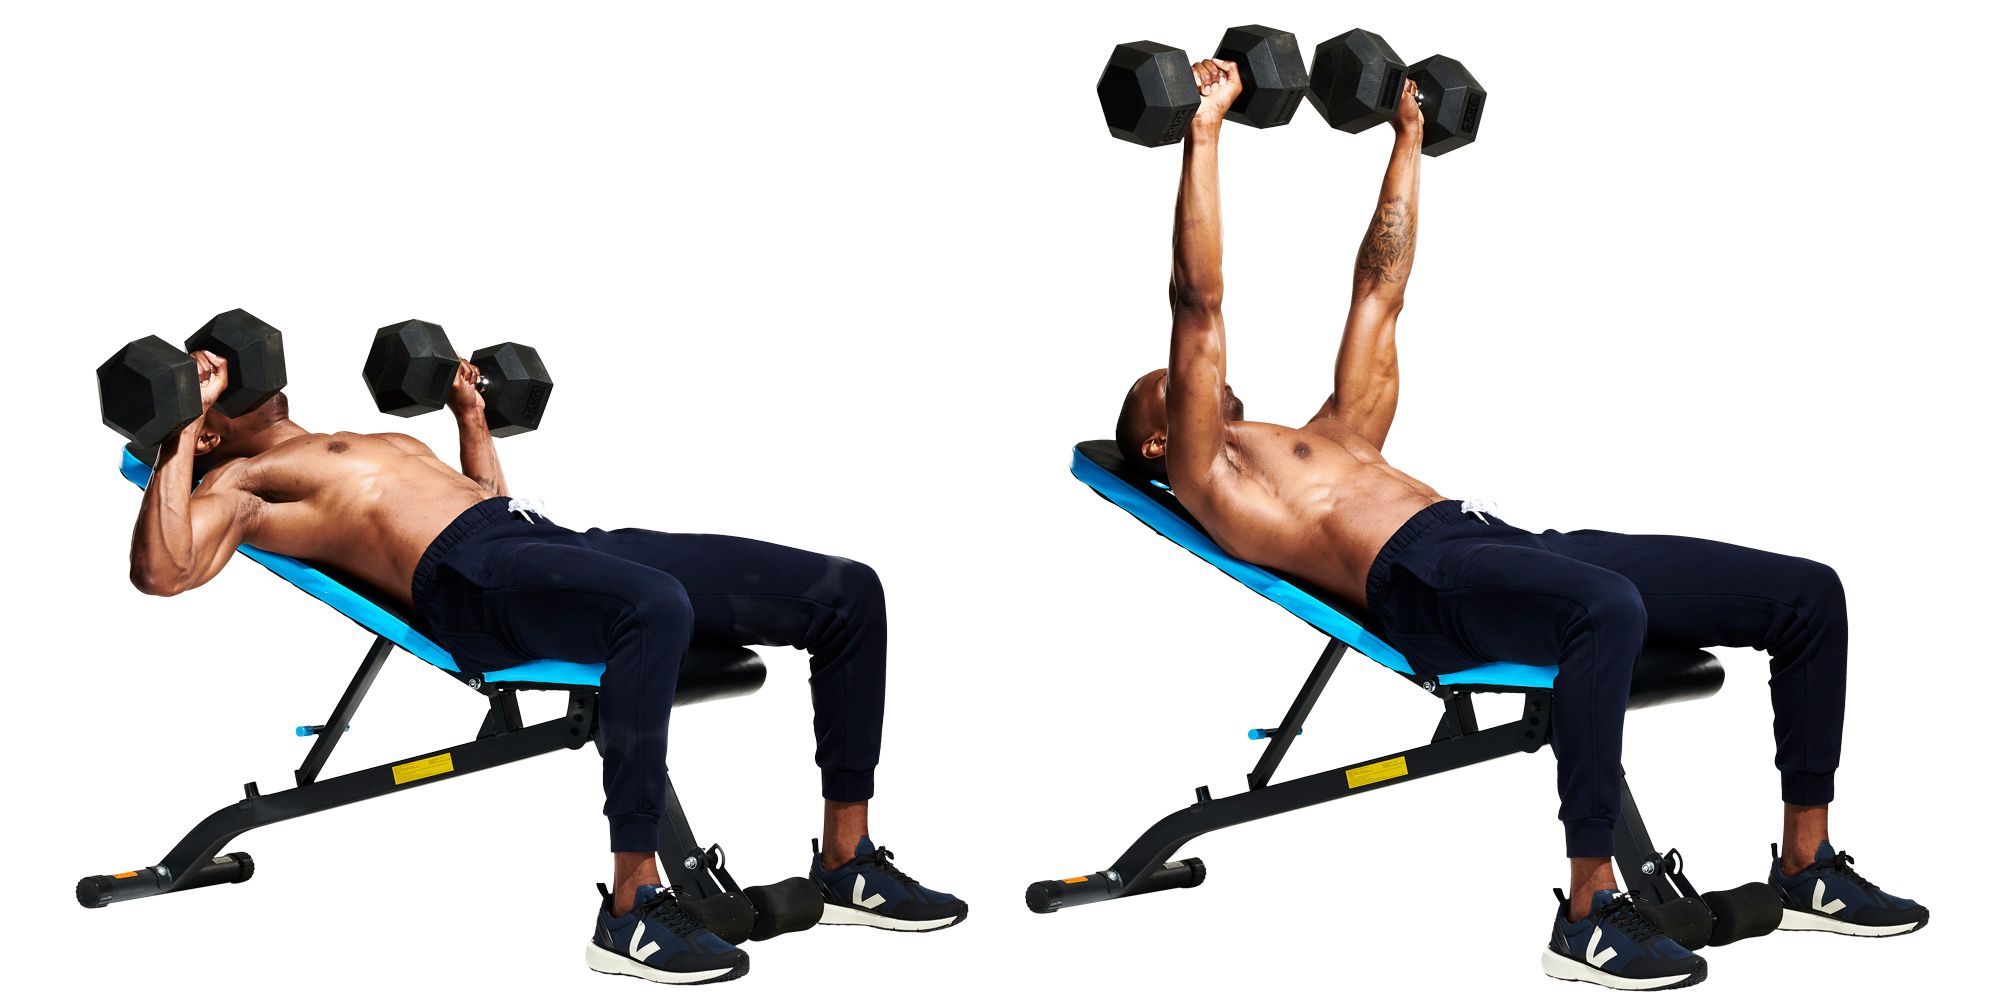 How to Do the Dumbbell Incline Bench Press Exercise for the Chest